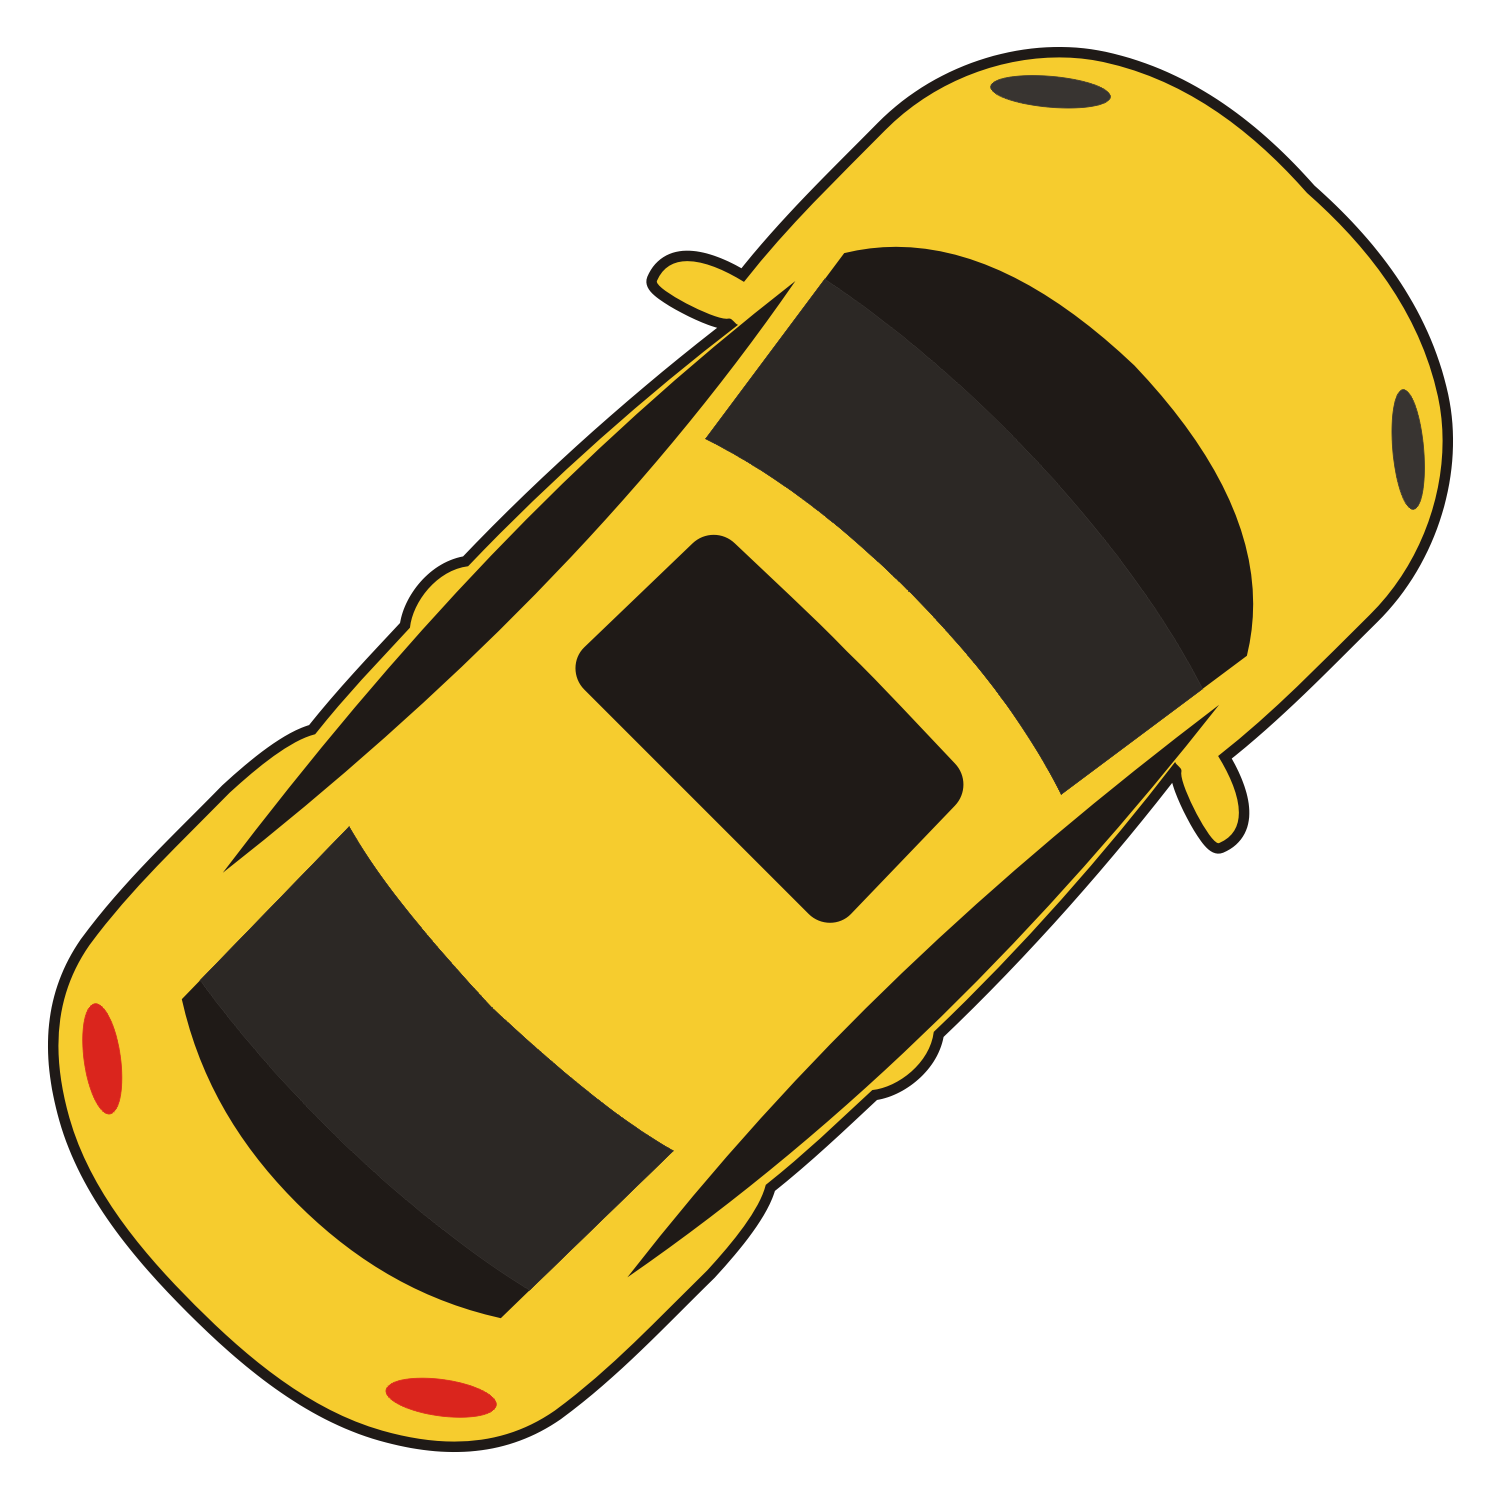 6 Car Icon Top View Images - Car Top View Vector, Car Icon Top View Clip  Art and Car Top View Vector / 